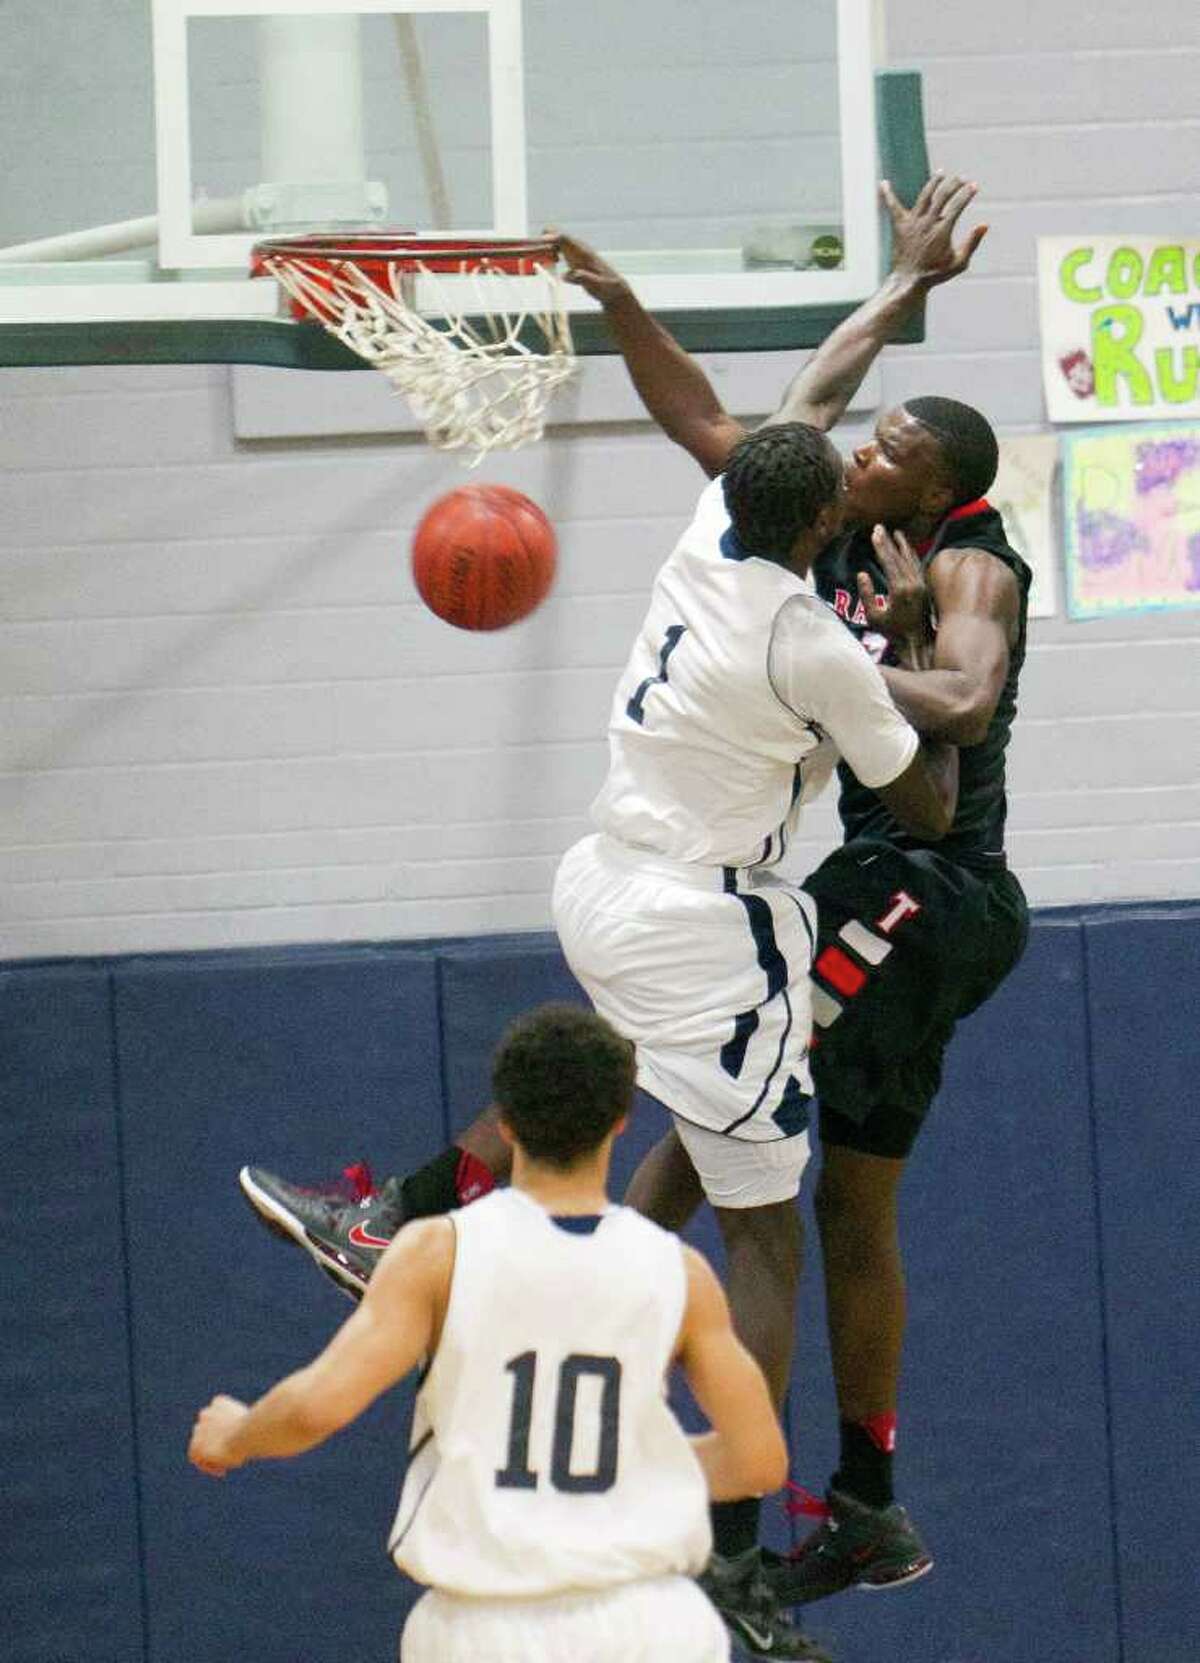 Terry's Derrick Griffin, right, dunks over Lamar's Wannah Bail during a 23-4A district game between Lamar Consolidated and Terry, Tuesday, January 3, 2012 in Rosenberg, Texas.